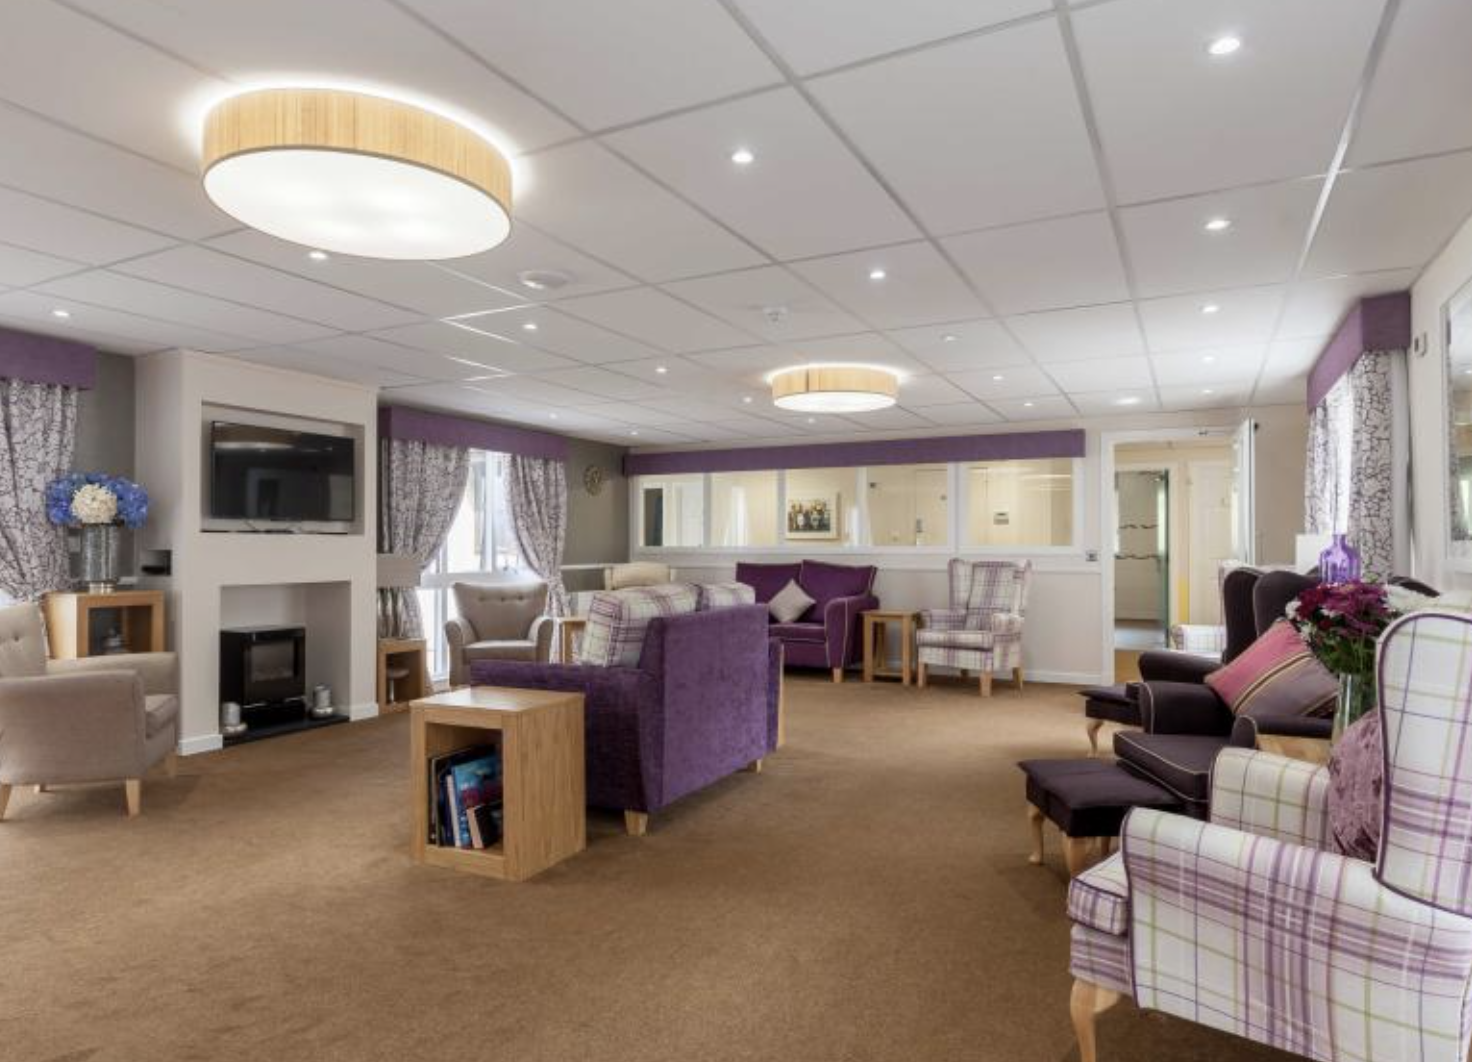 Fairview House care home